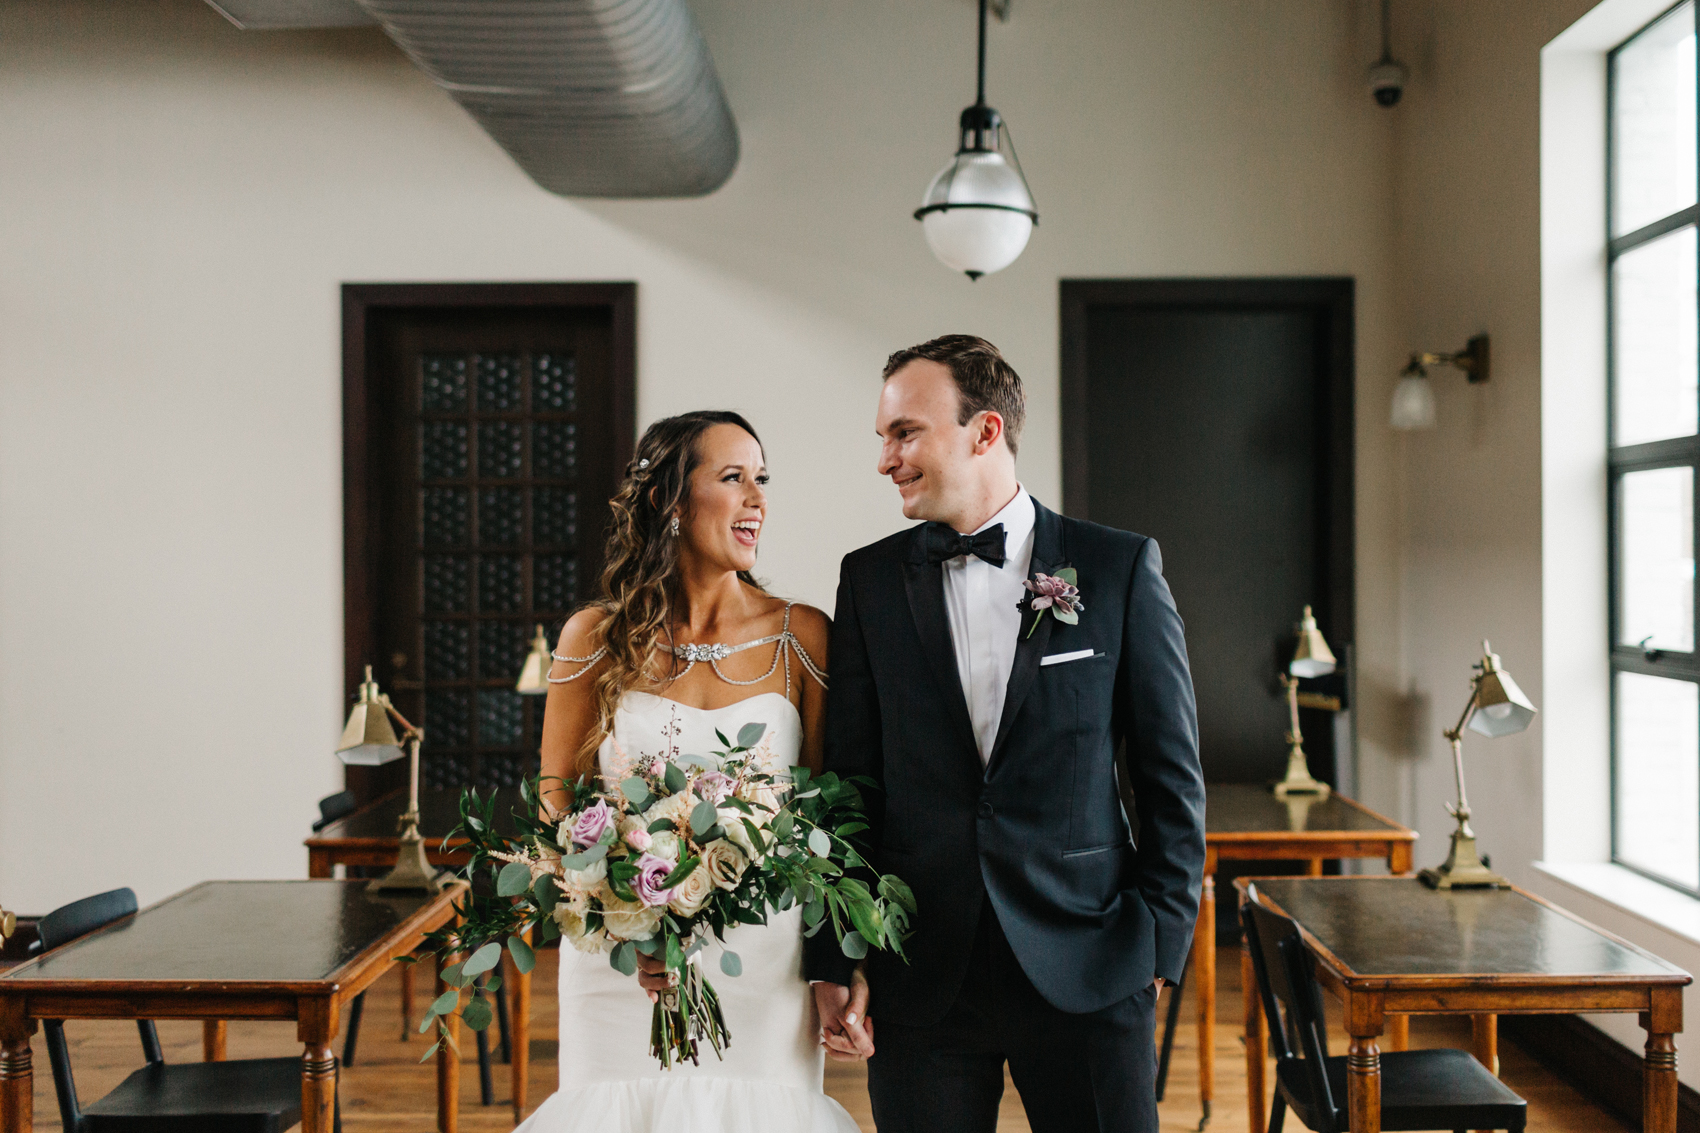 Oxford Exchange wedding photographer in downtown Tampa in an industrial urban venue